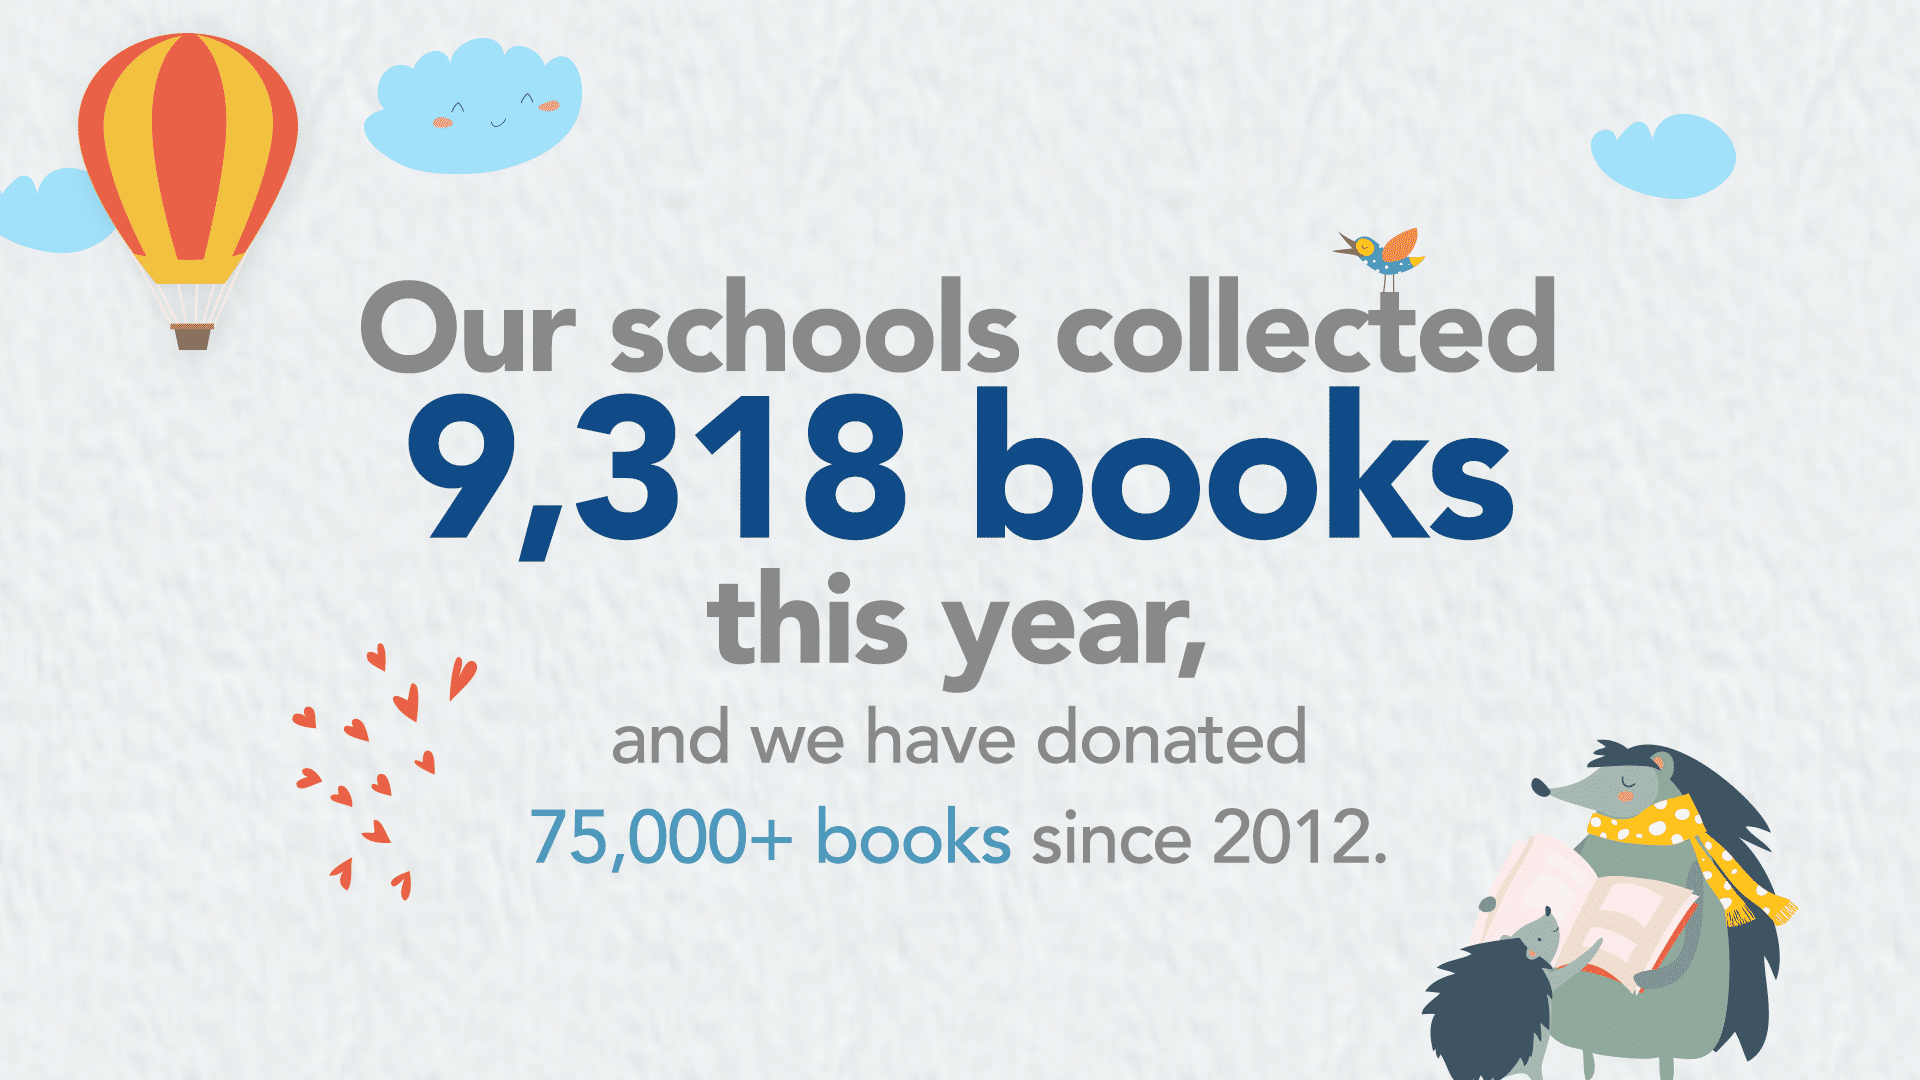 New Horizon Academy schools collected 9,318 books this year, and we have donated over 75,000 books since 2012.